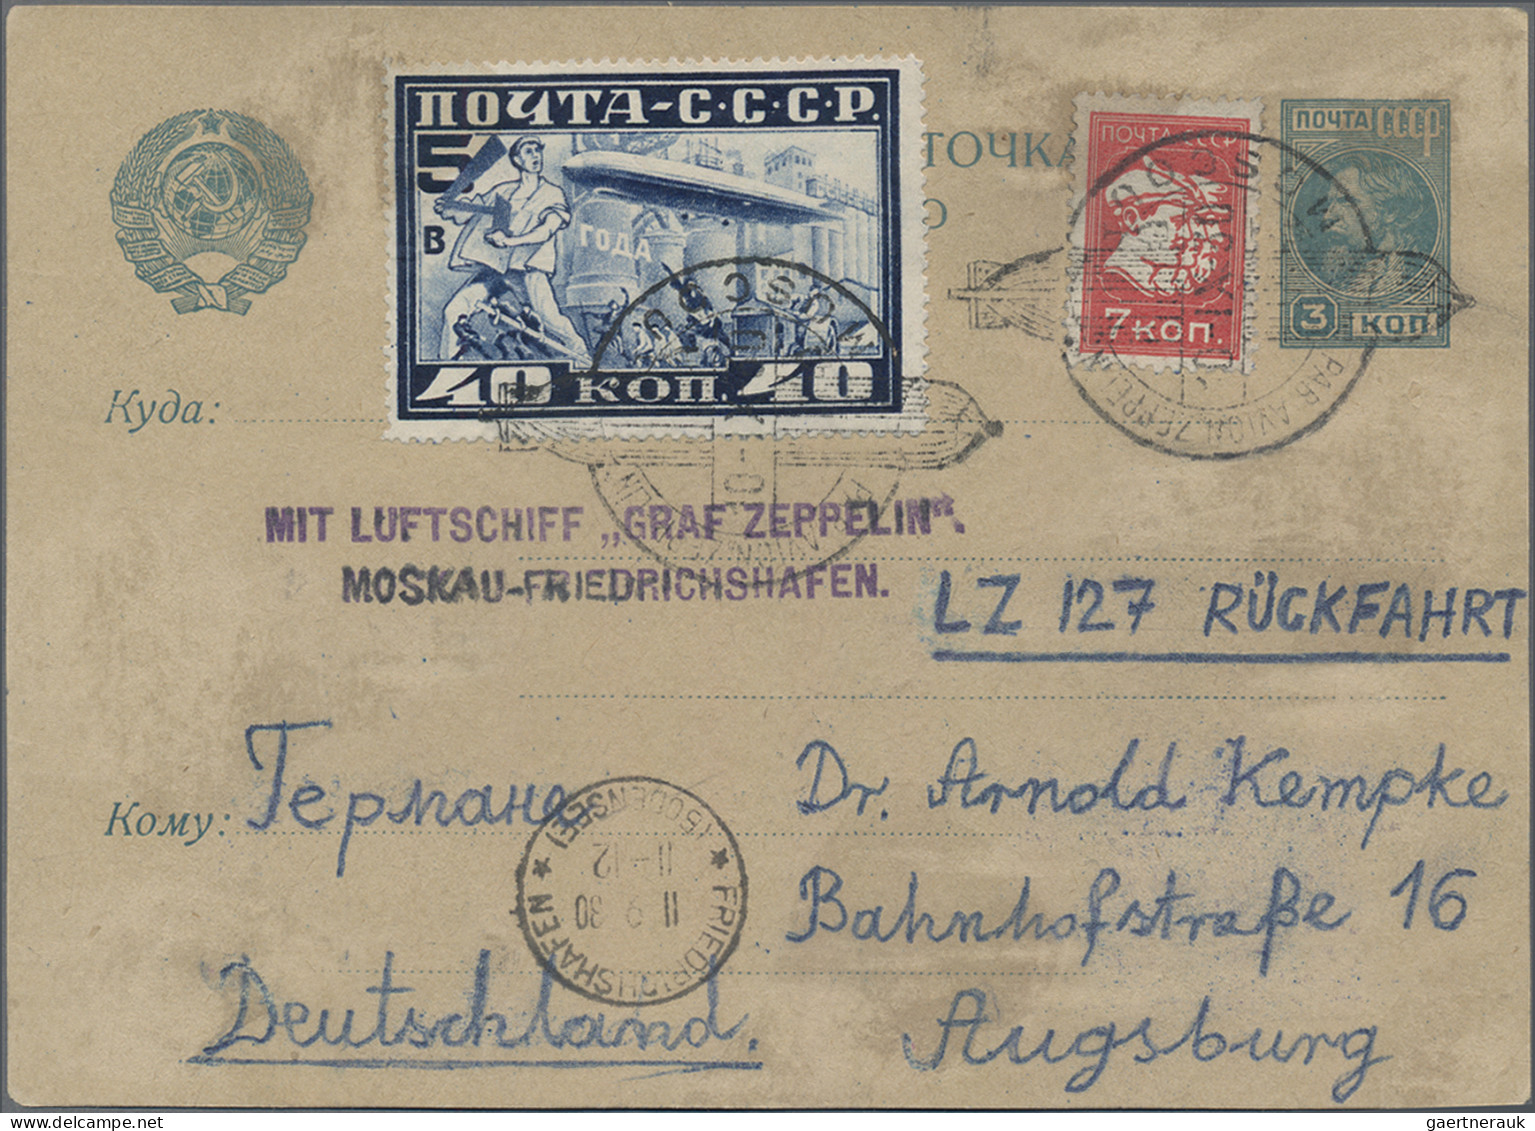 Air Mail: 1915/1951, assortment of 20 covers/cards, airmail and airmail-related,